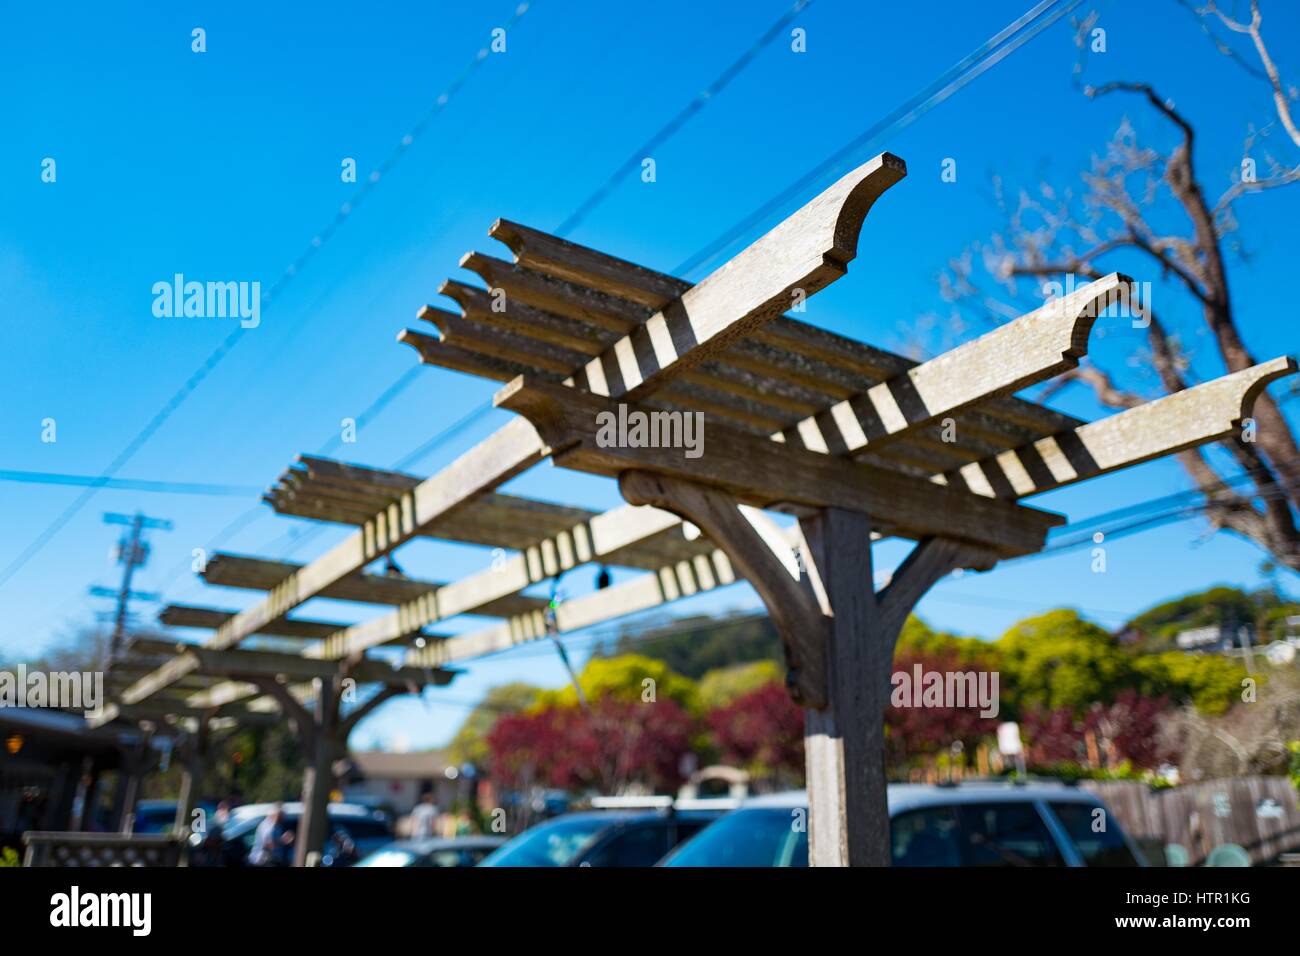 Stinson Beach, California, United States - March 12, 2017: Wooden trellis  with a parking lot visible against a blue sky on a sunny day, Stinson Beach  Stock Photo - Alamy